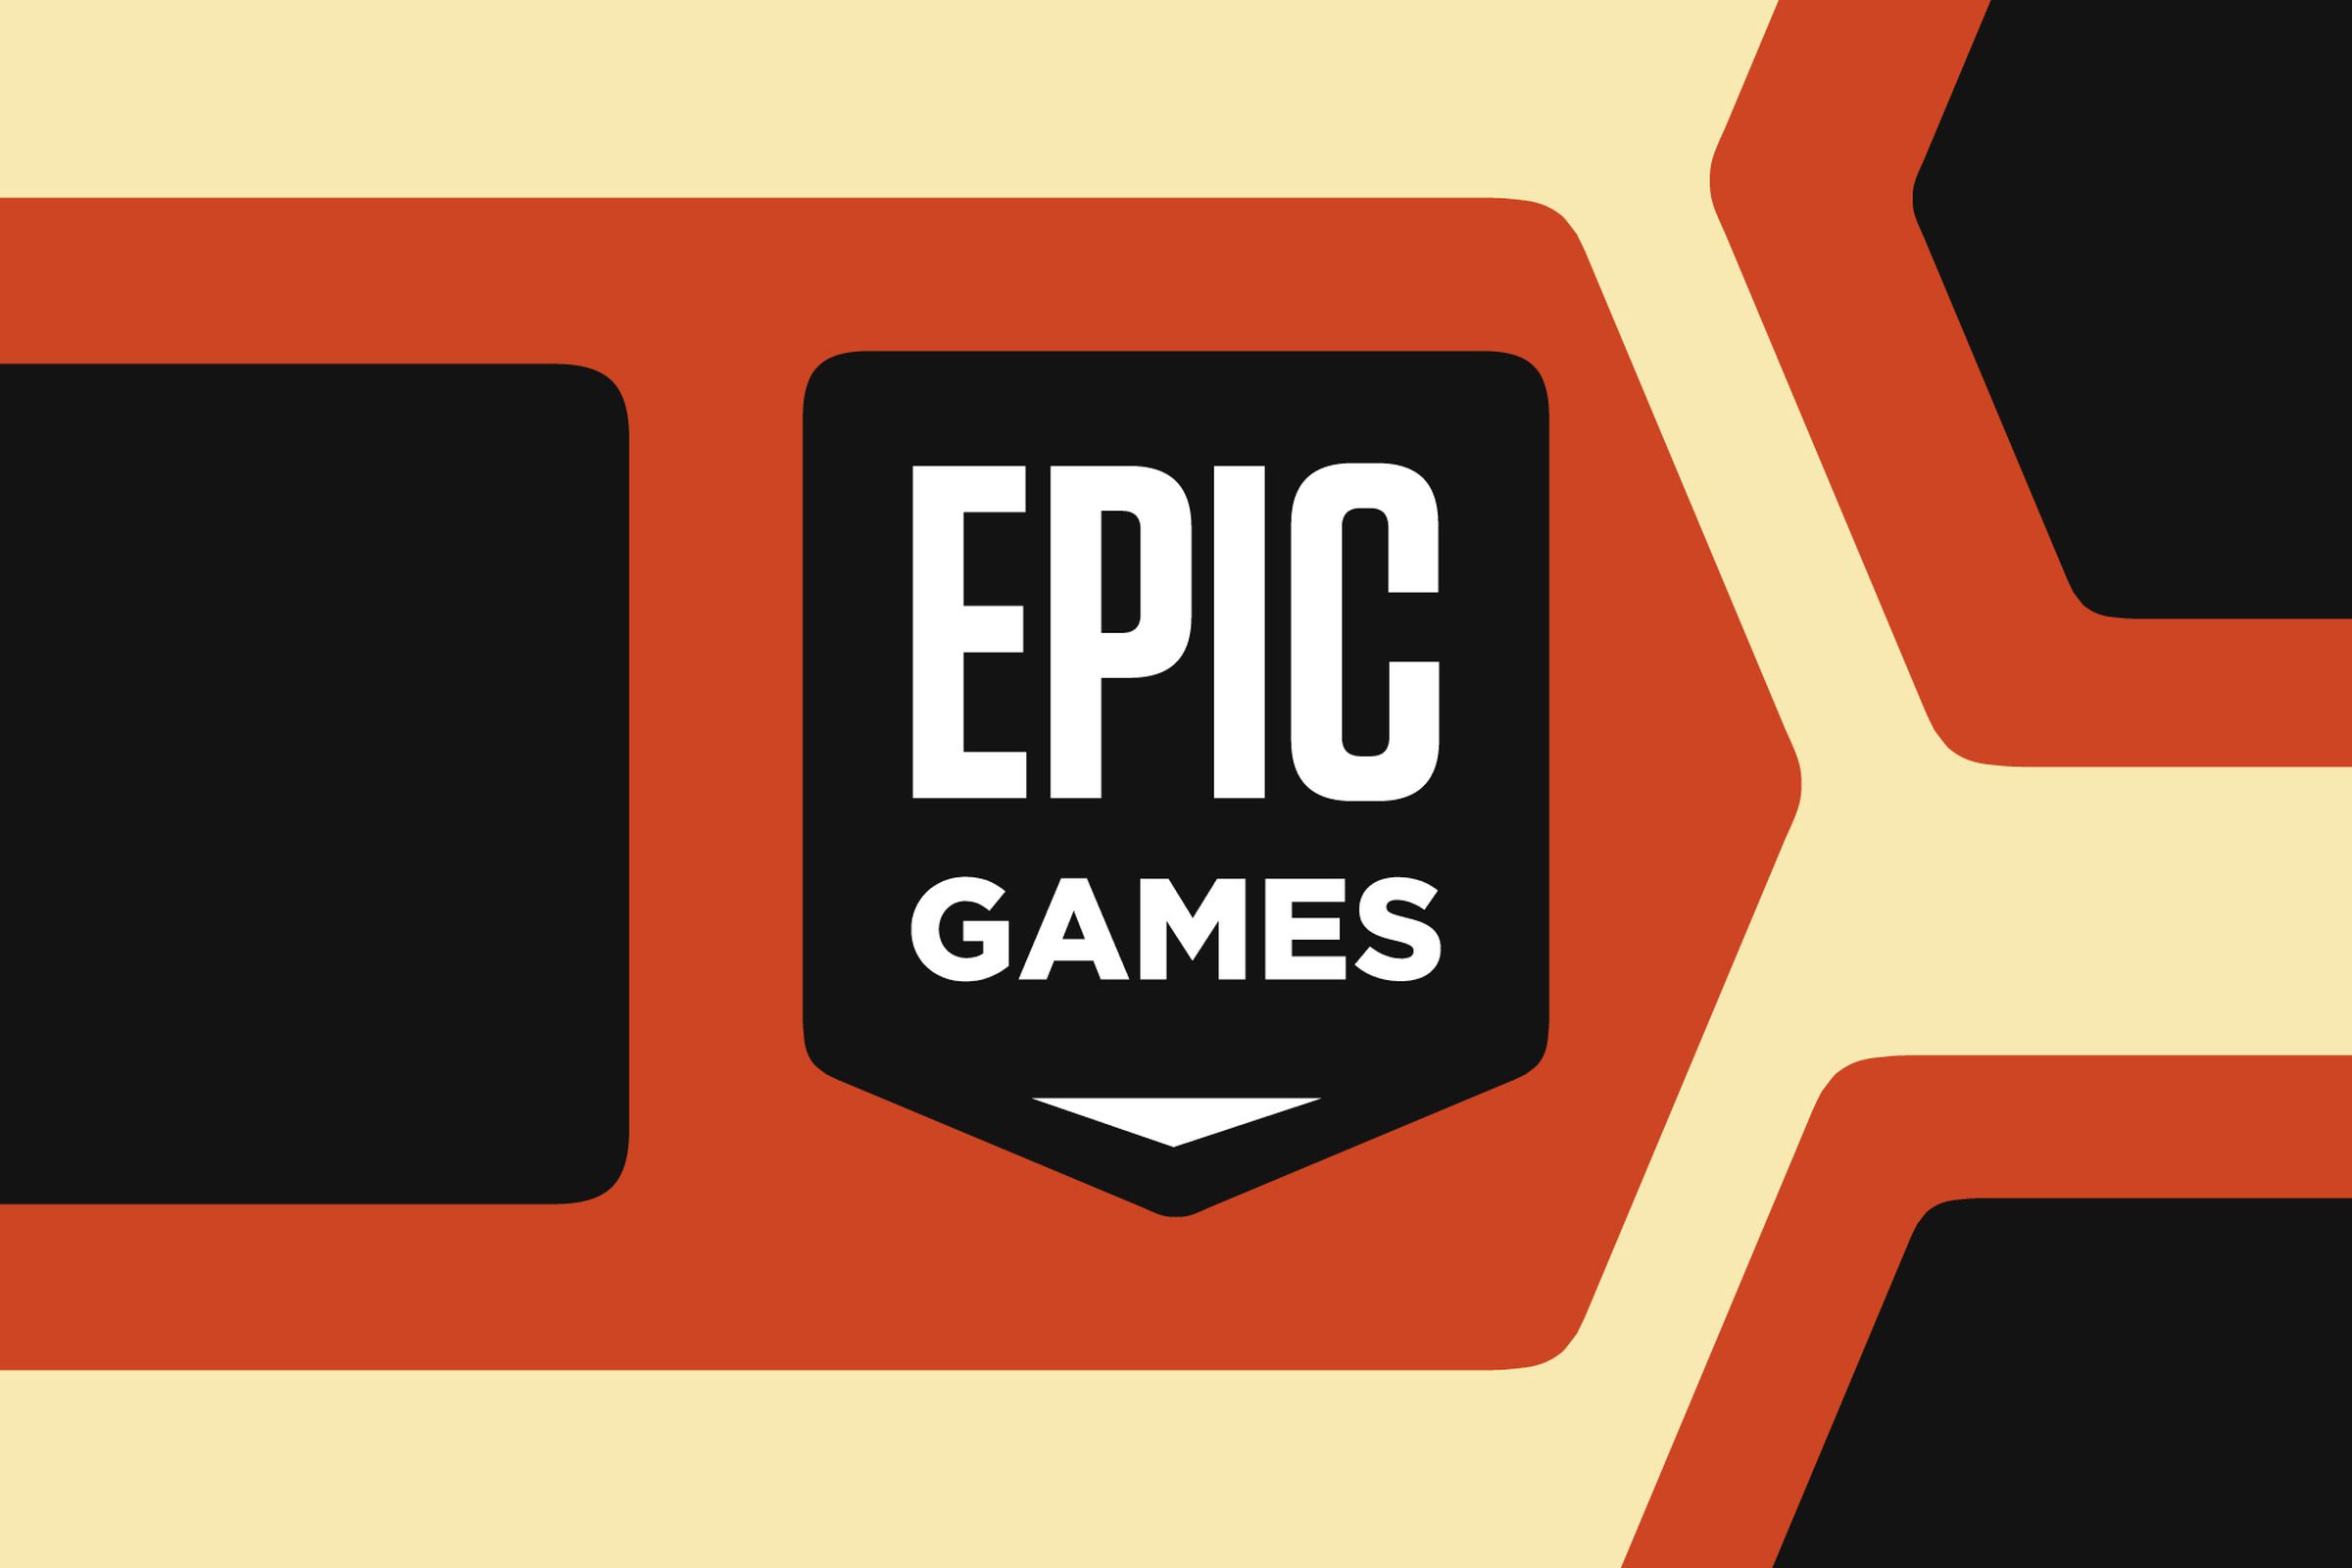 An illustration of the Epic Games logo.